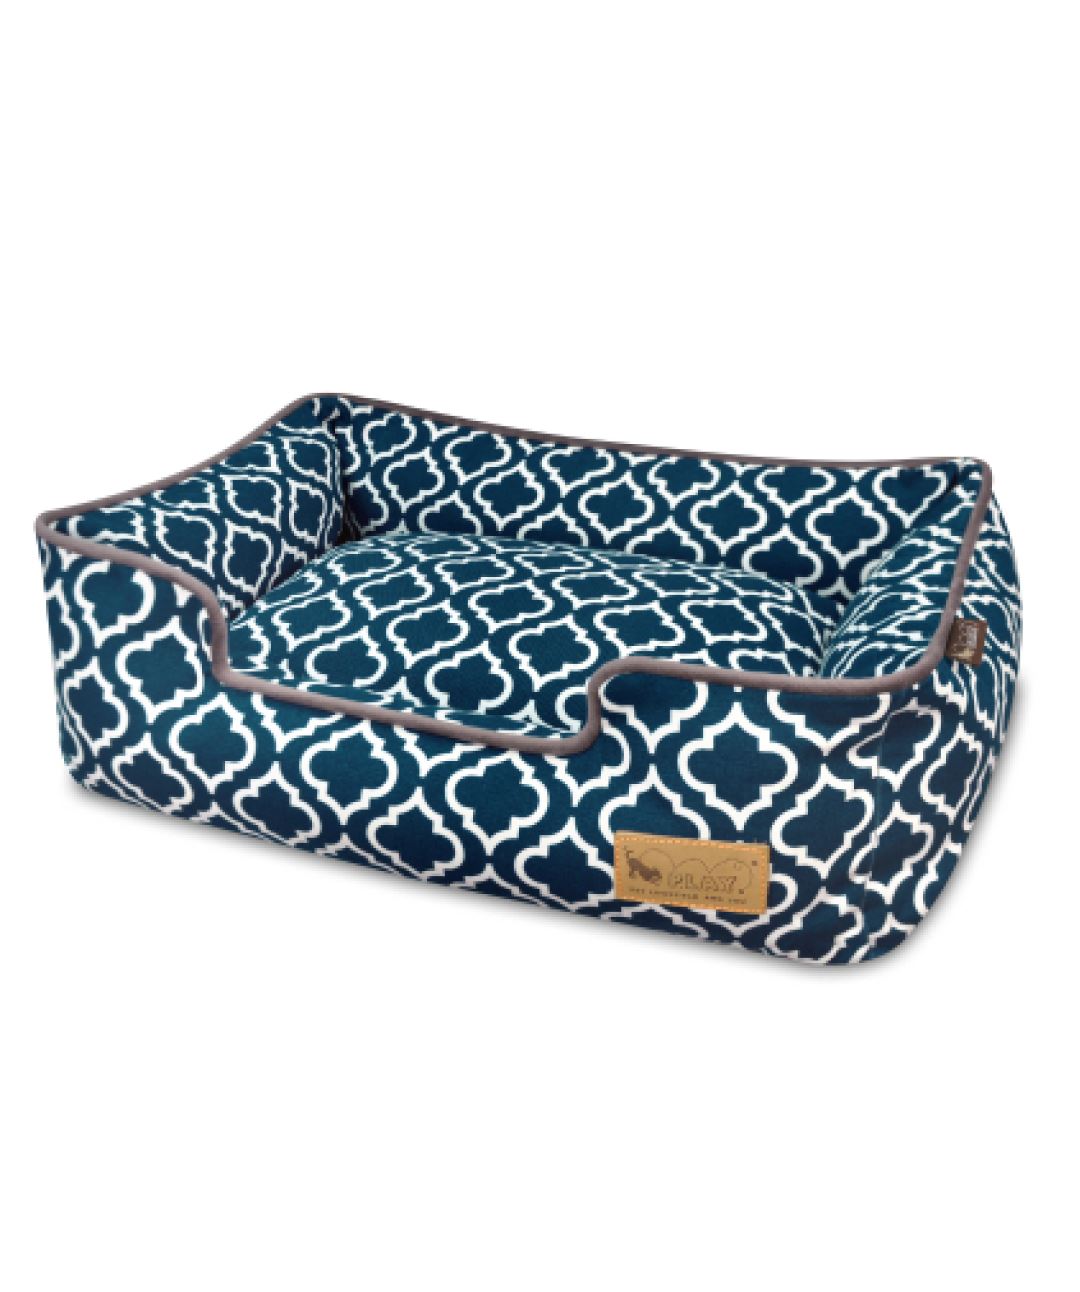 P.L.A.Y. Moroccan Lounge Dog Bed (2 Colors) Dog Bed PLAY S Moroccan Navy 